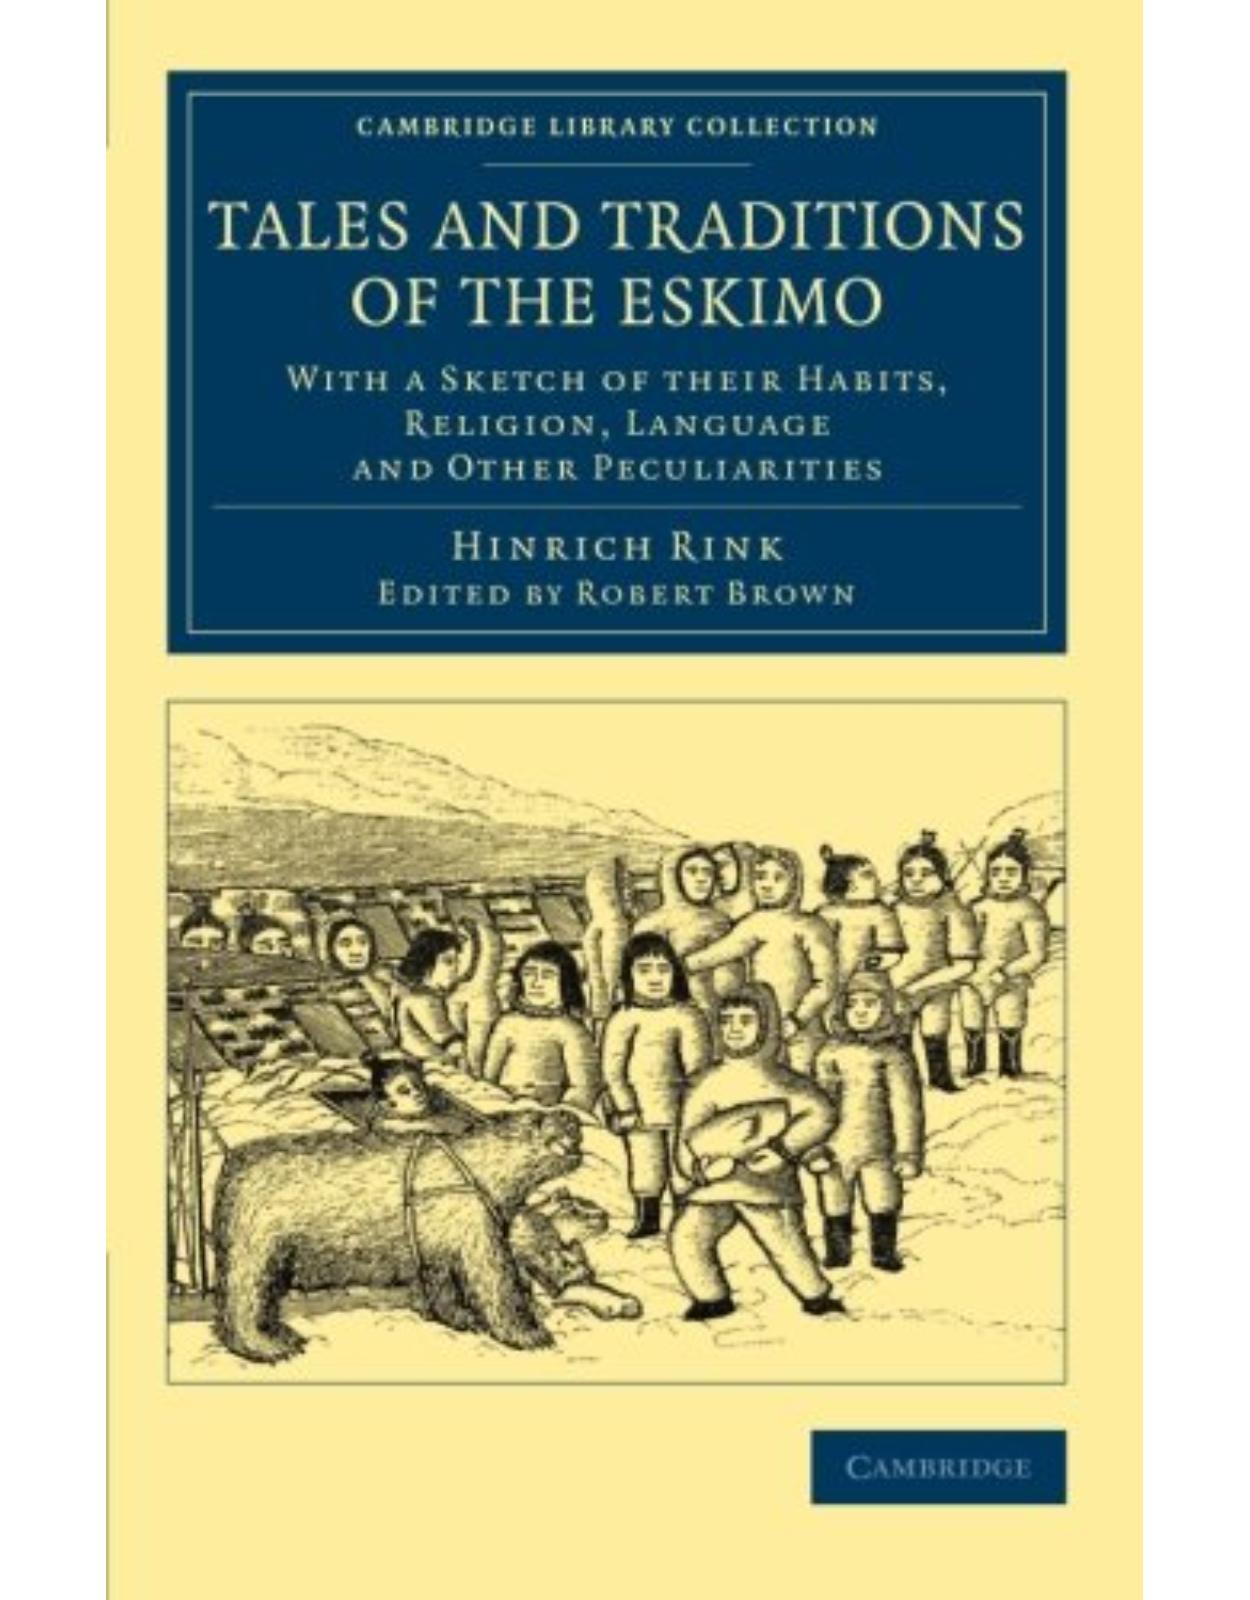 Tales and Traditions of the Eskimo: With a Sketch of their Habits, Religion, Language and Other Peculiarities (Cambridge Library Collection - Polar Exploration)